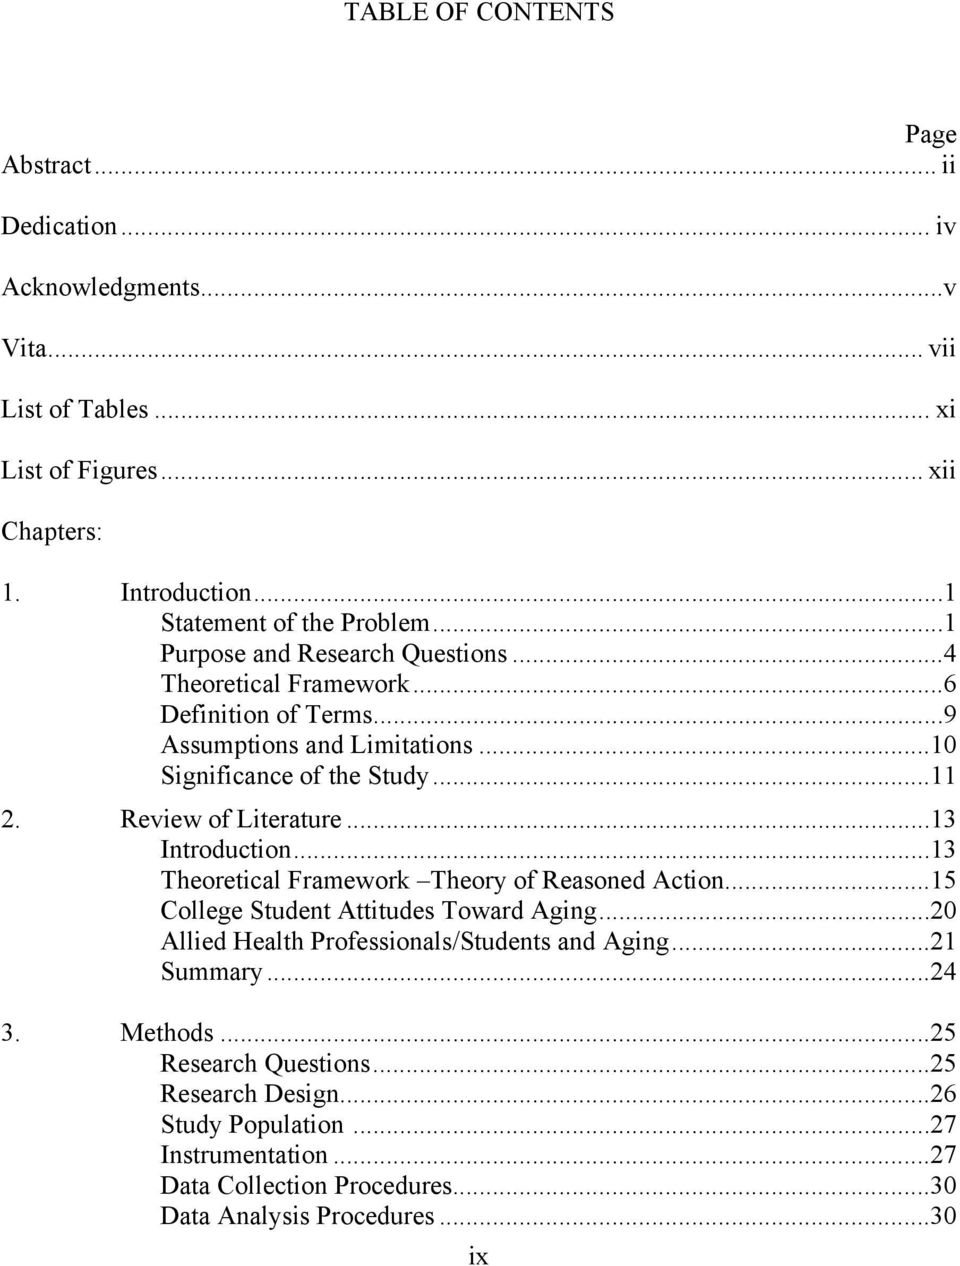 Collection of american thesis and dissertations